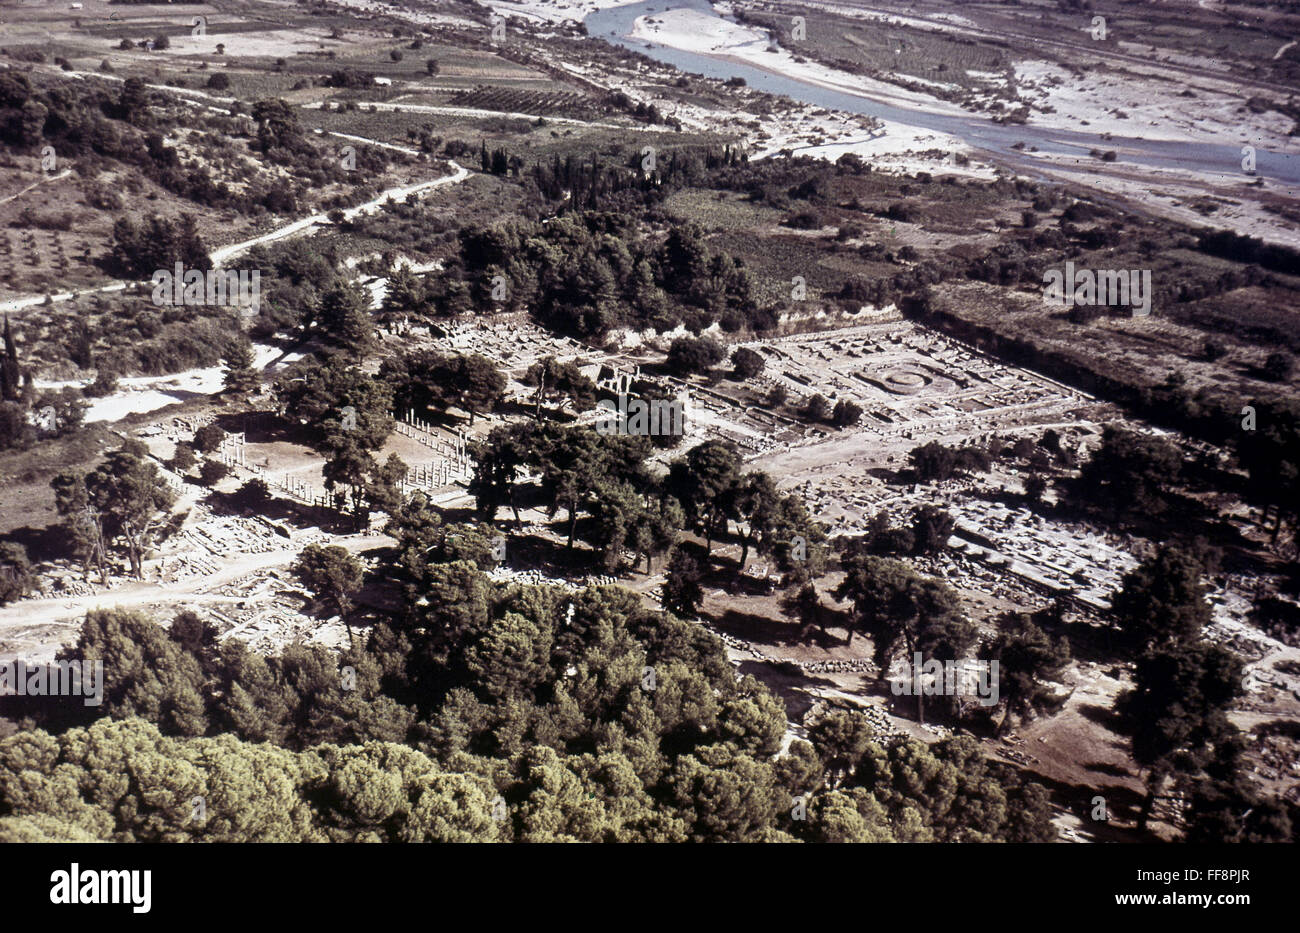 GREECE: OLYMPIA. /nAerial view of Olympia, site of the Olympic Games of antiquity. Stock Photo